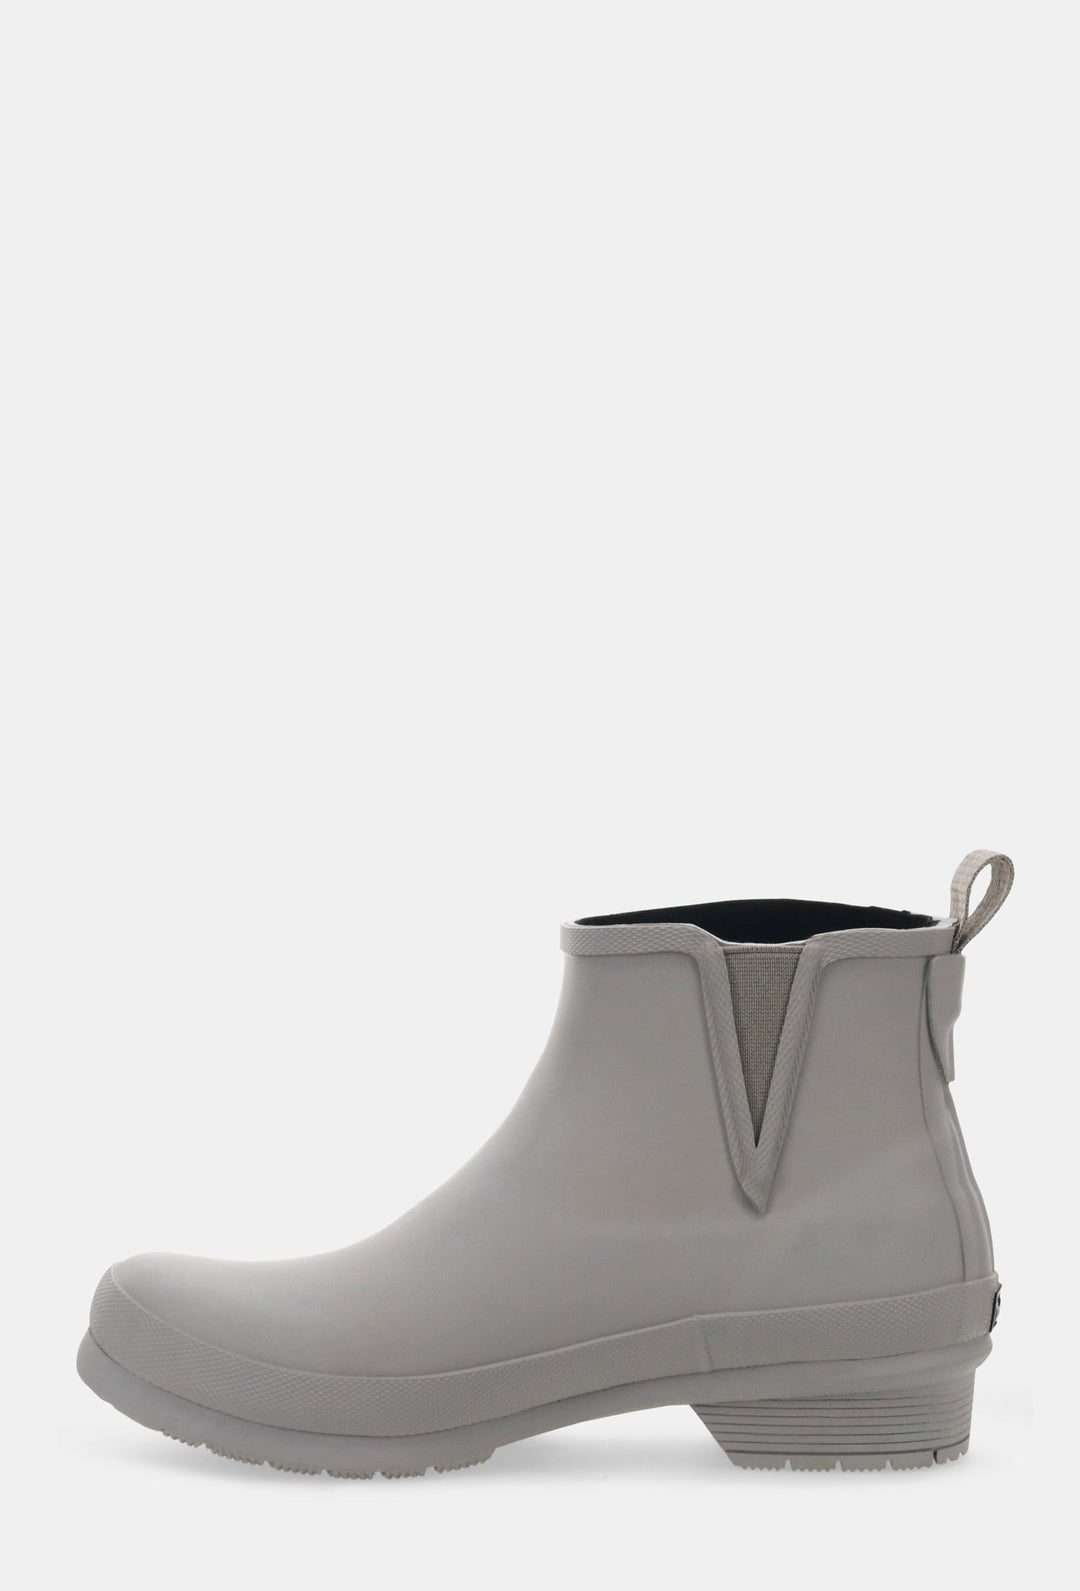 Classic Matte Ankle Rain Boot - Taupe - Western Chief